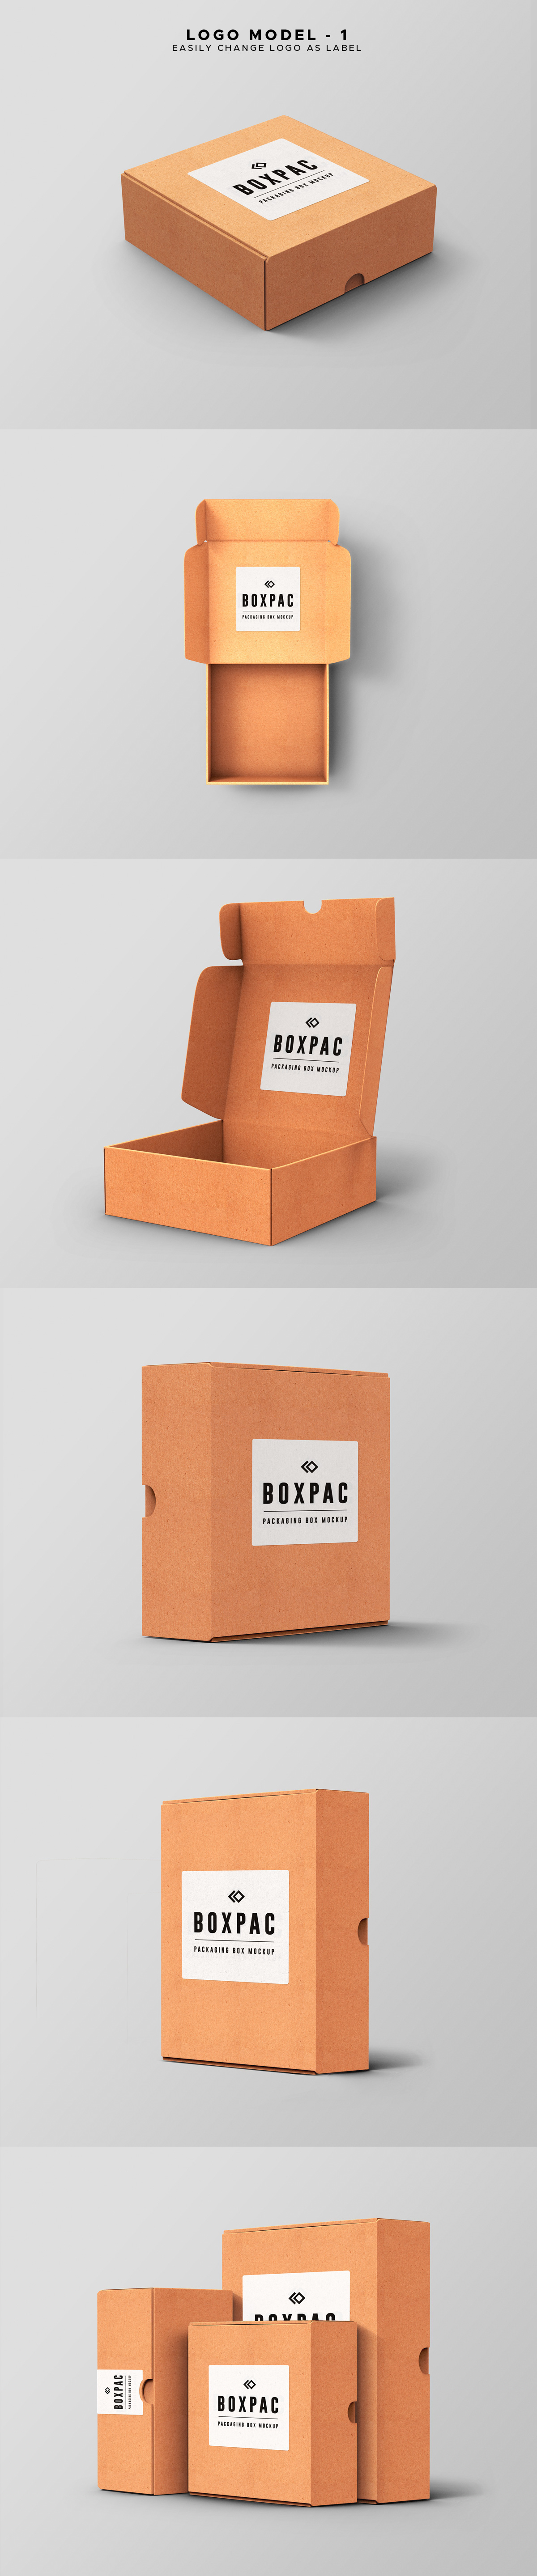 Download Food Packaging Box PSD Mockups - GraphicsFuel